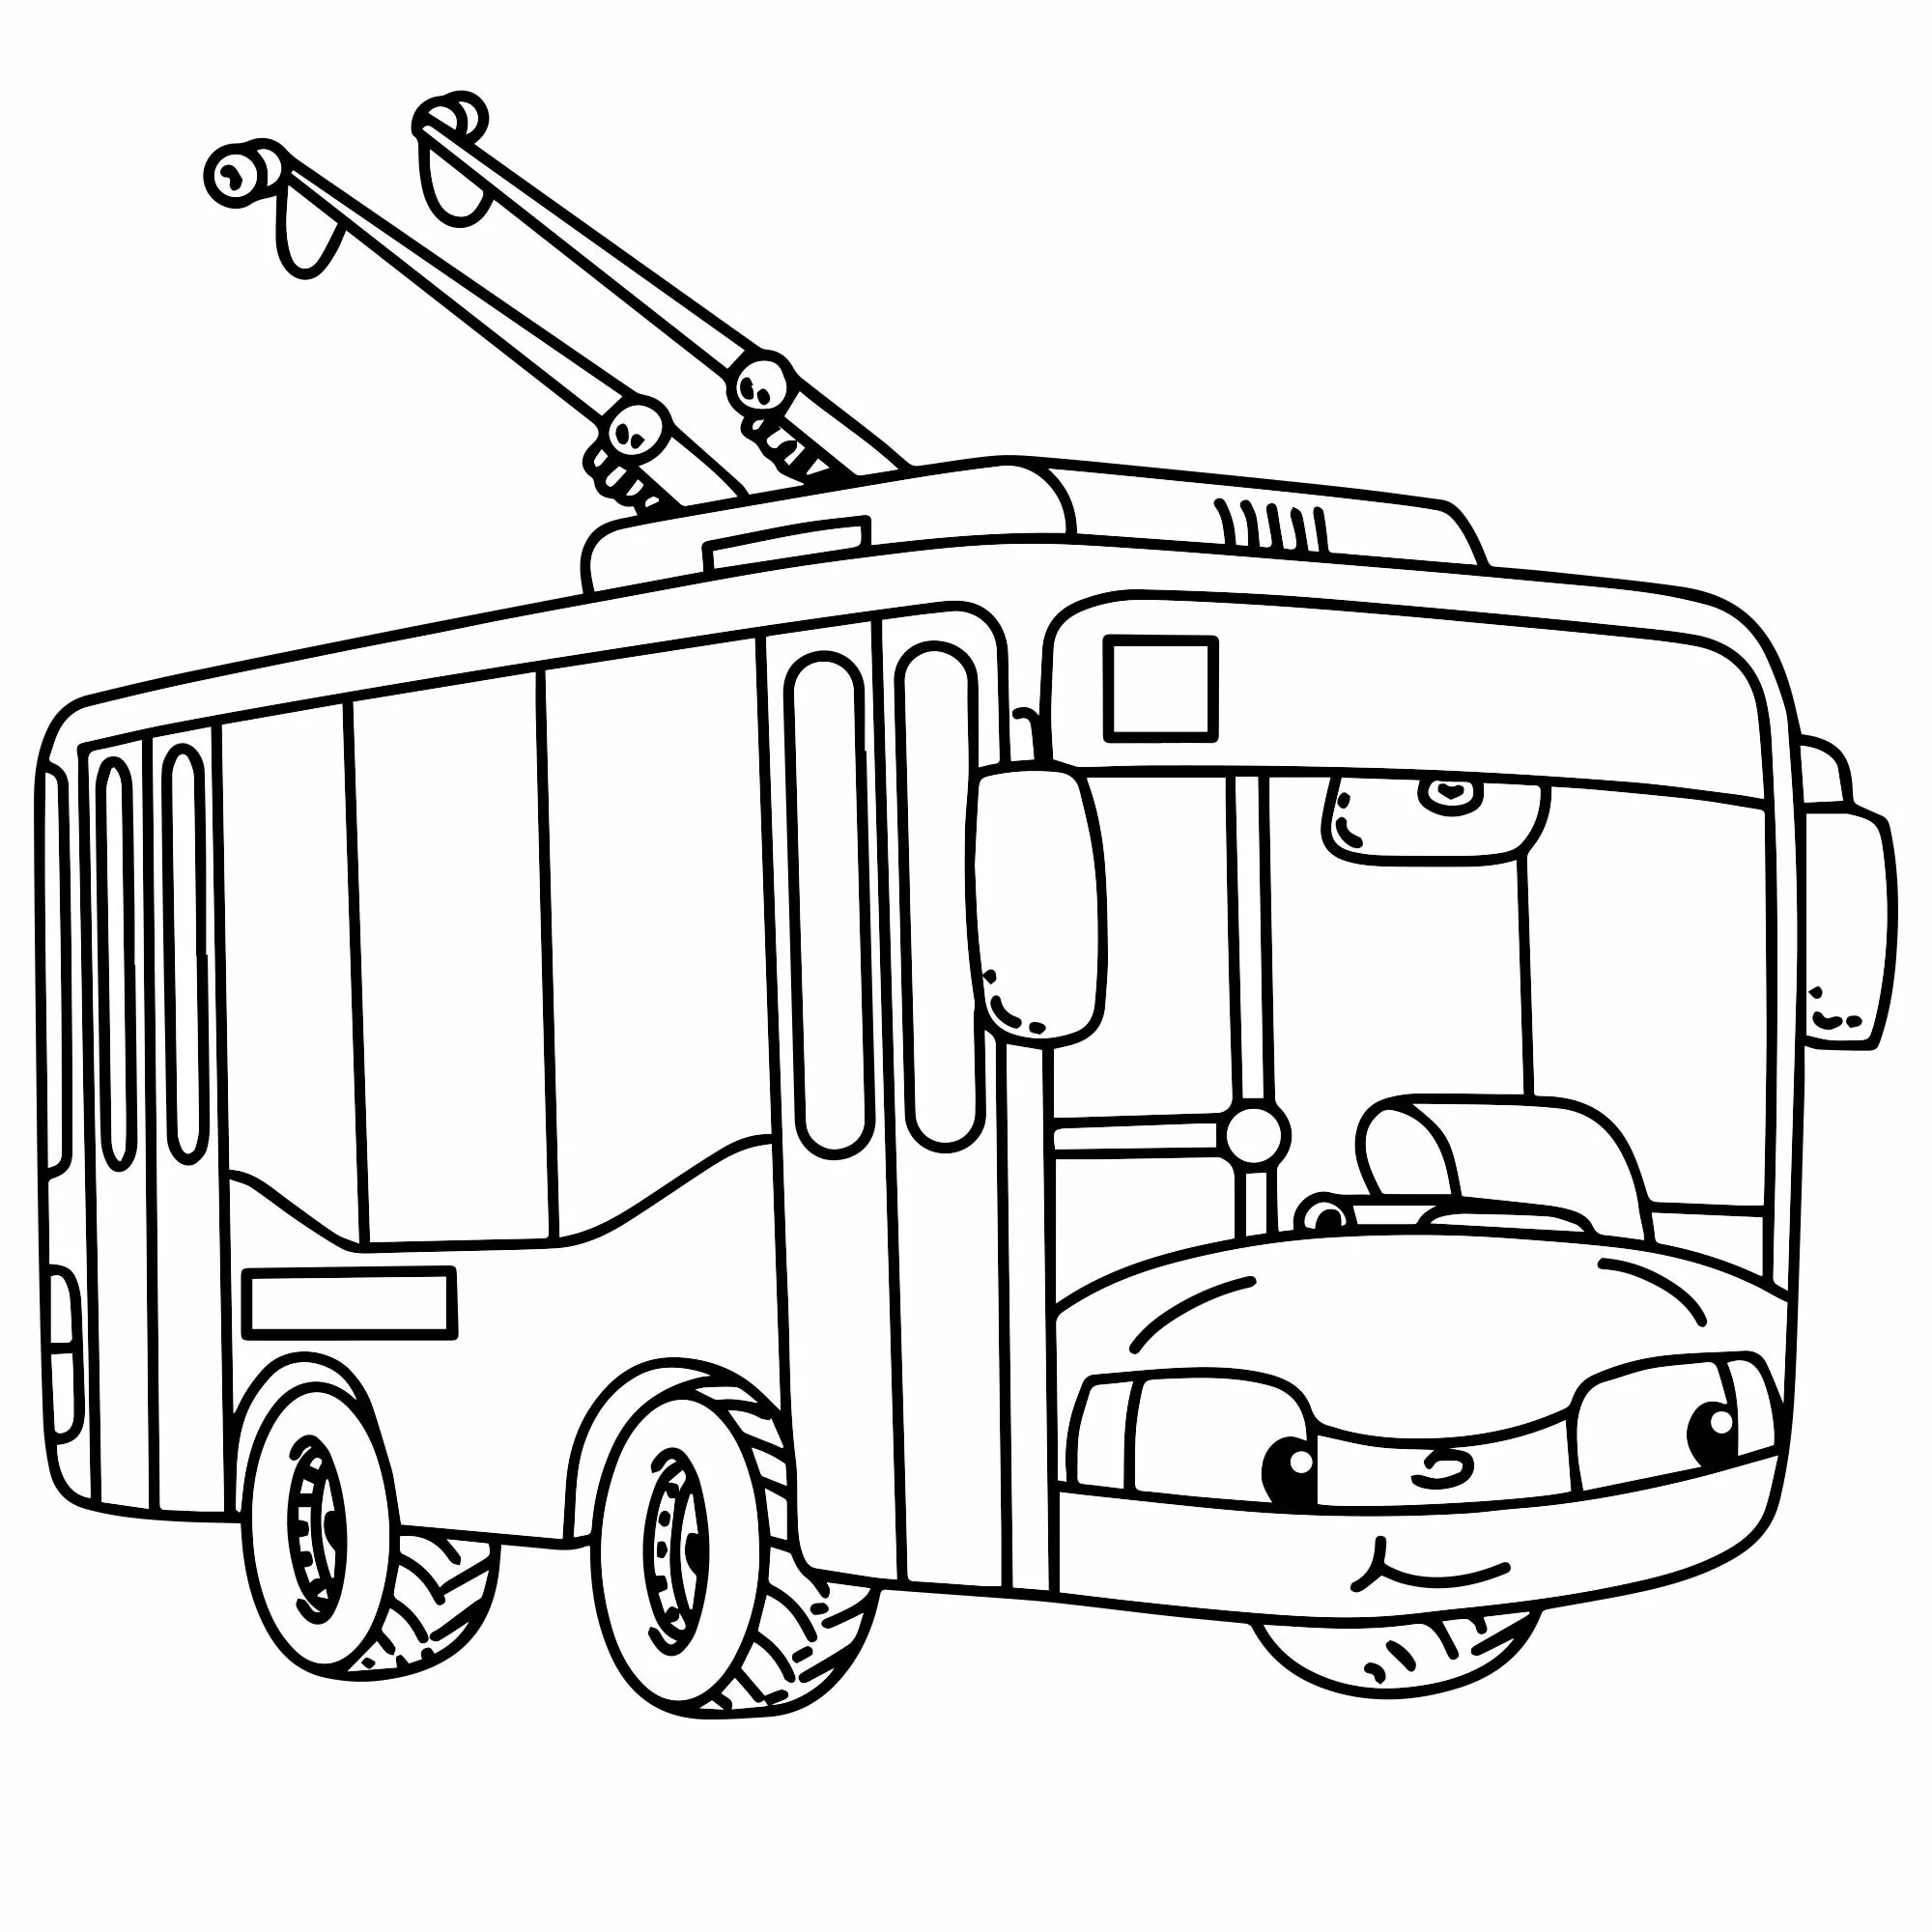 Coloring book shining trolleybus for students